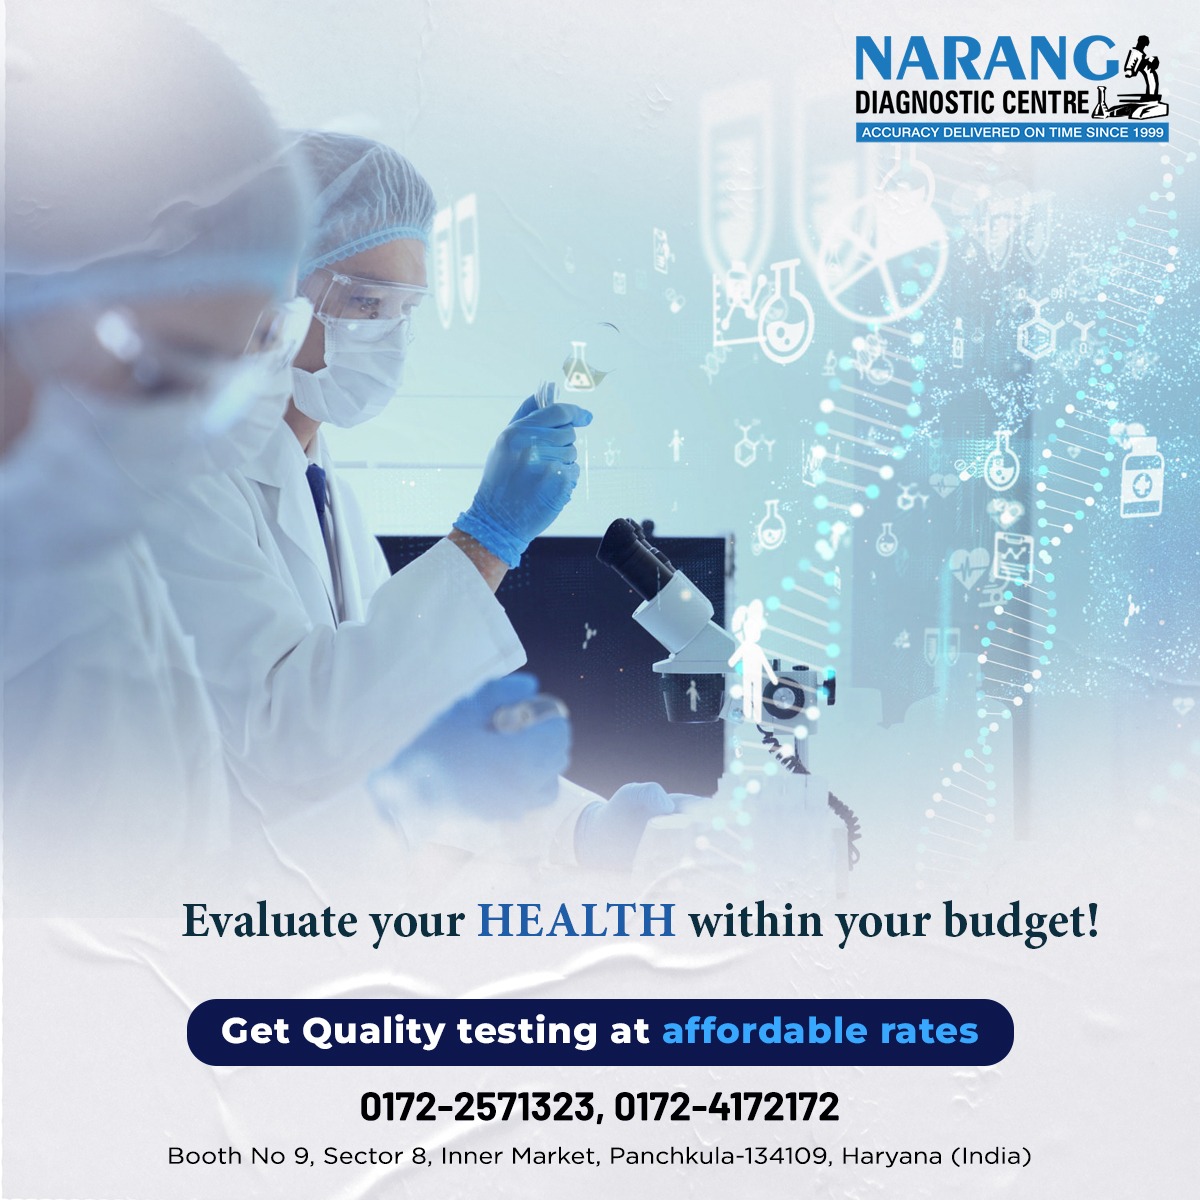 Evaluate your health within your budget!

Get Quality testing at affordable rates. 

Book your 𝐓𝐞𝐬𝐭 now - 0172-2571323 or 0172-4172172 Or 

#Diagnosticcentre #Trusteddiagnosticcentre #Wholebodycheckup #narangdiagnosticcentre #Healthpackage #HealthCheckup #healthcheckups